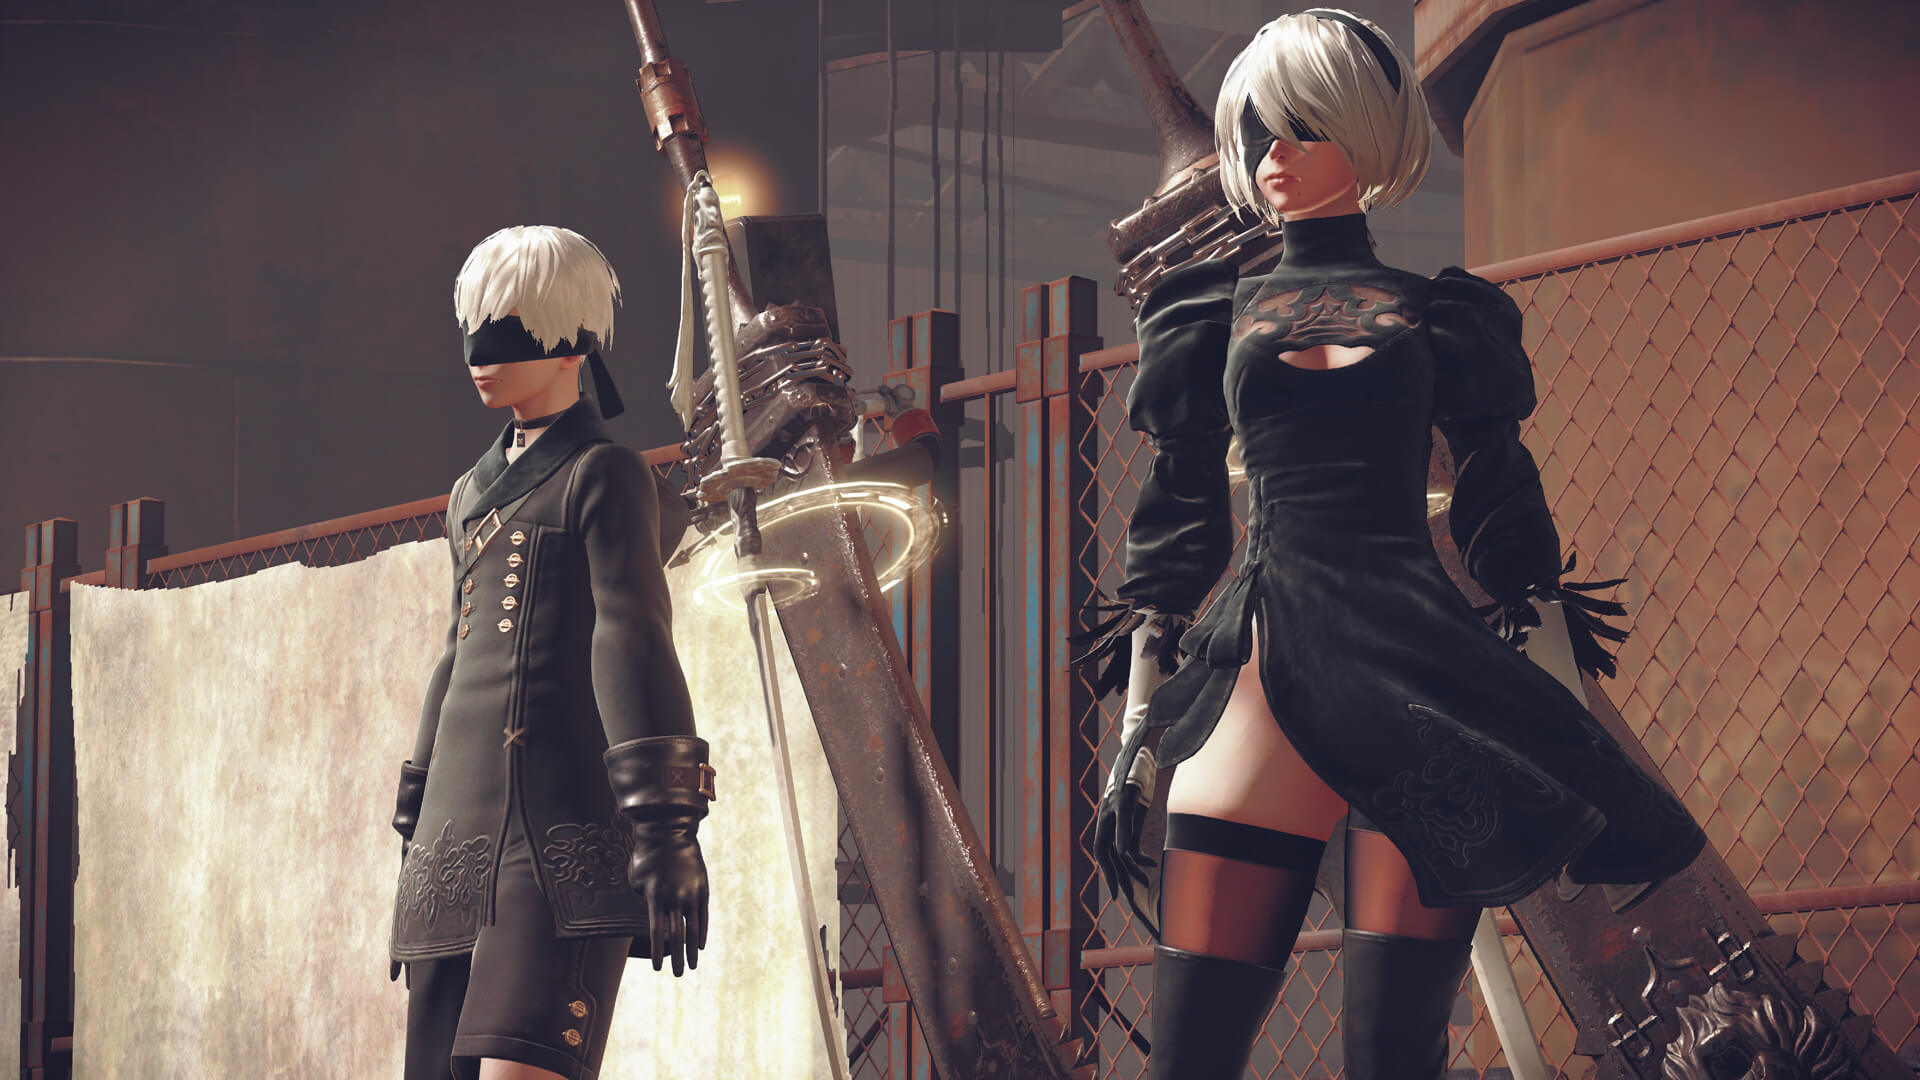 NieR: Automata Release Date Set for February 2017